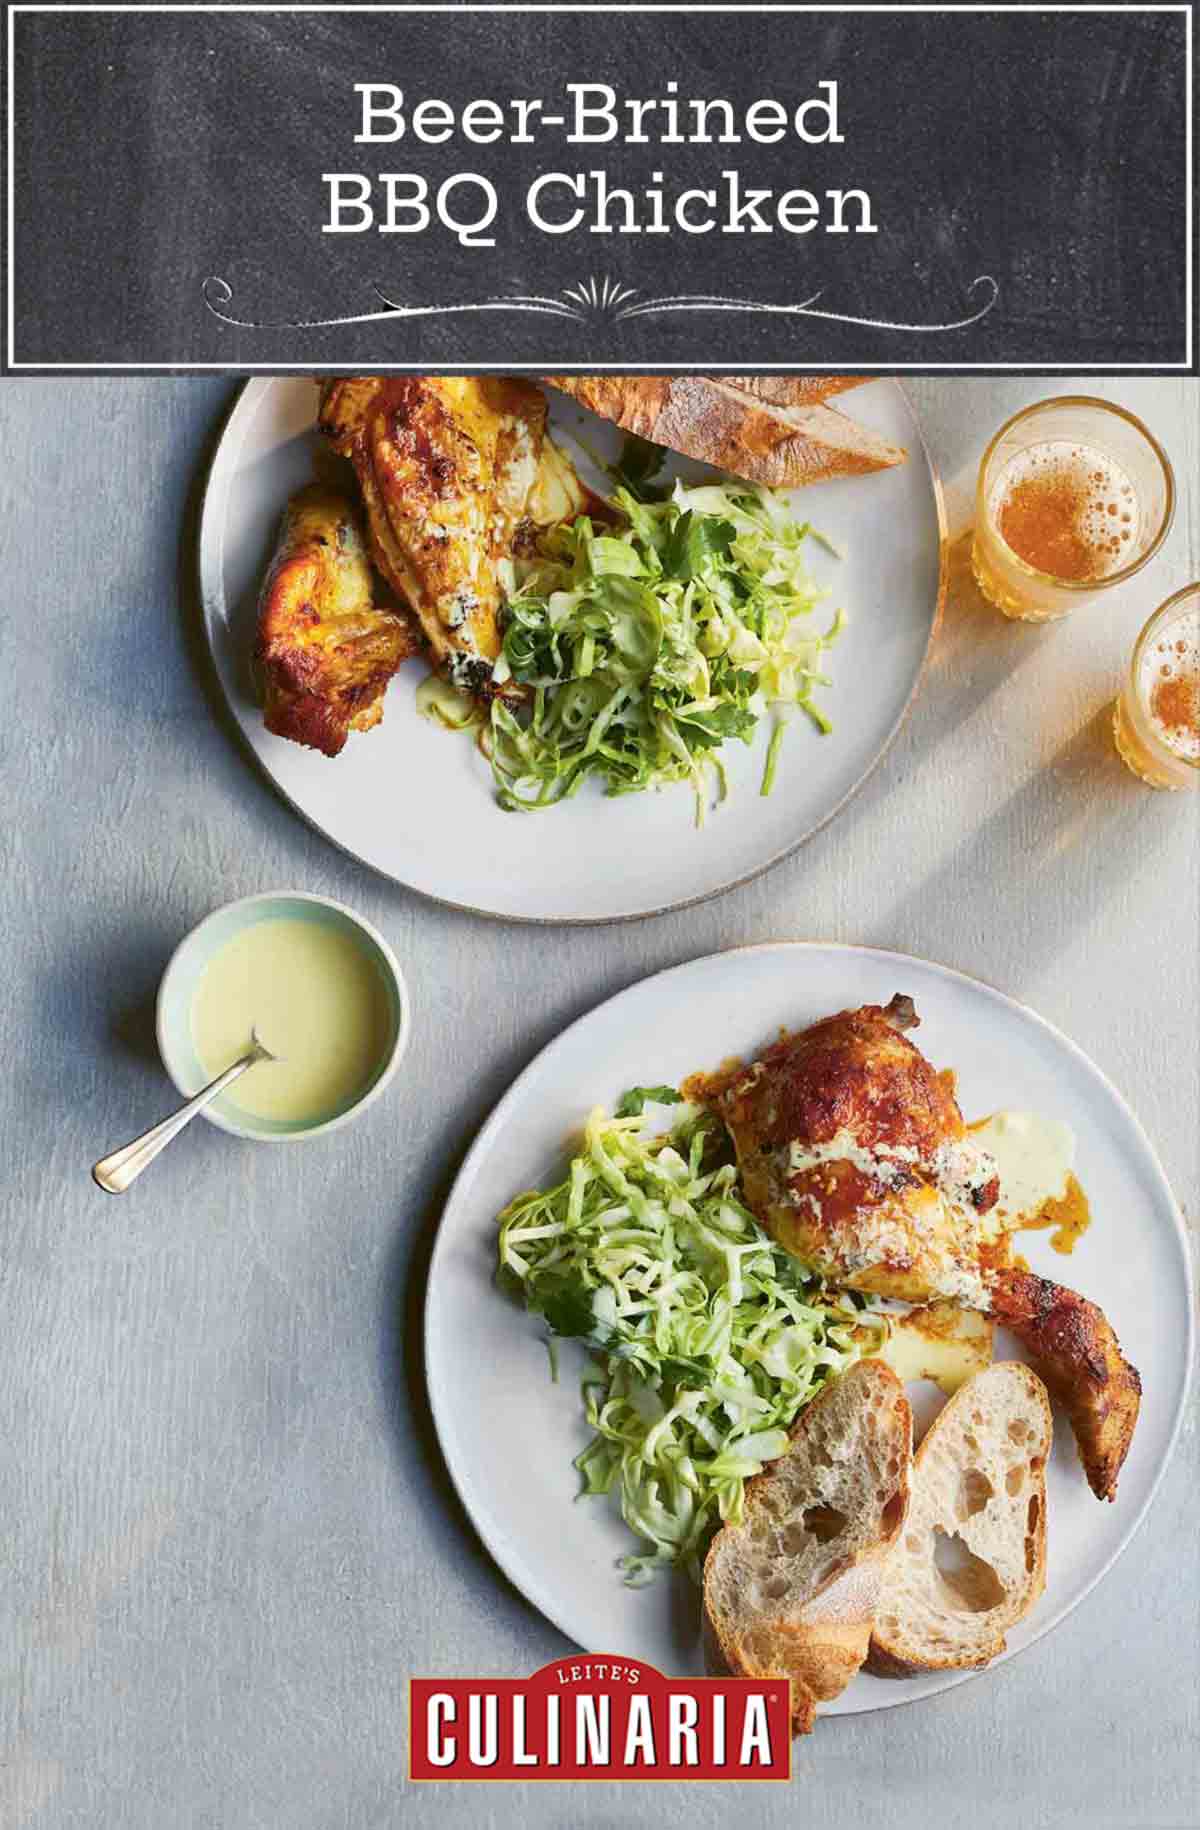 Two plates of beer-brined bbq chicken, shredded cabbage, and artisan bread, with a small bowl of dip between them.